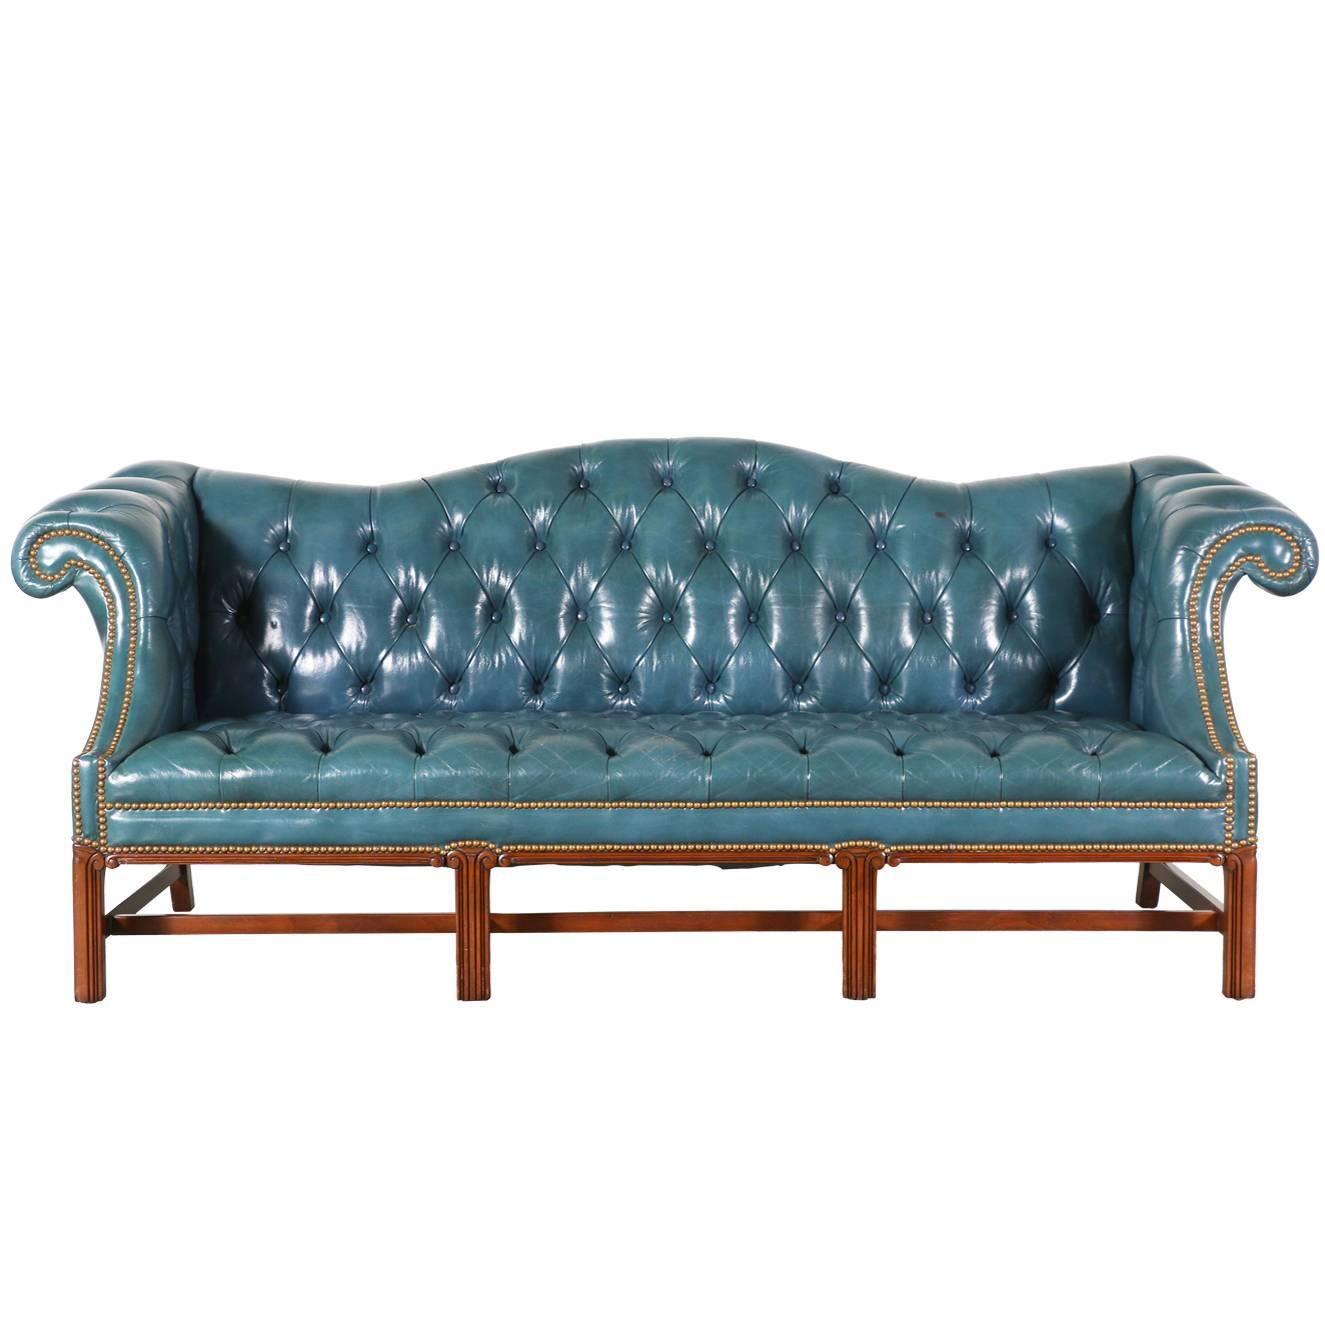 Vintage English Leather Teal Blue Chesterfield Sofa